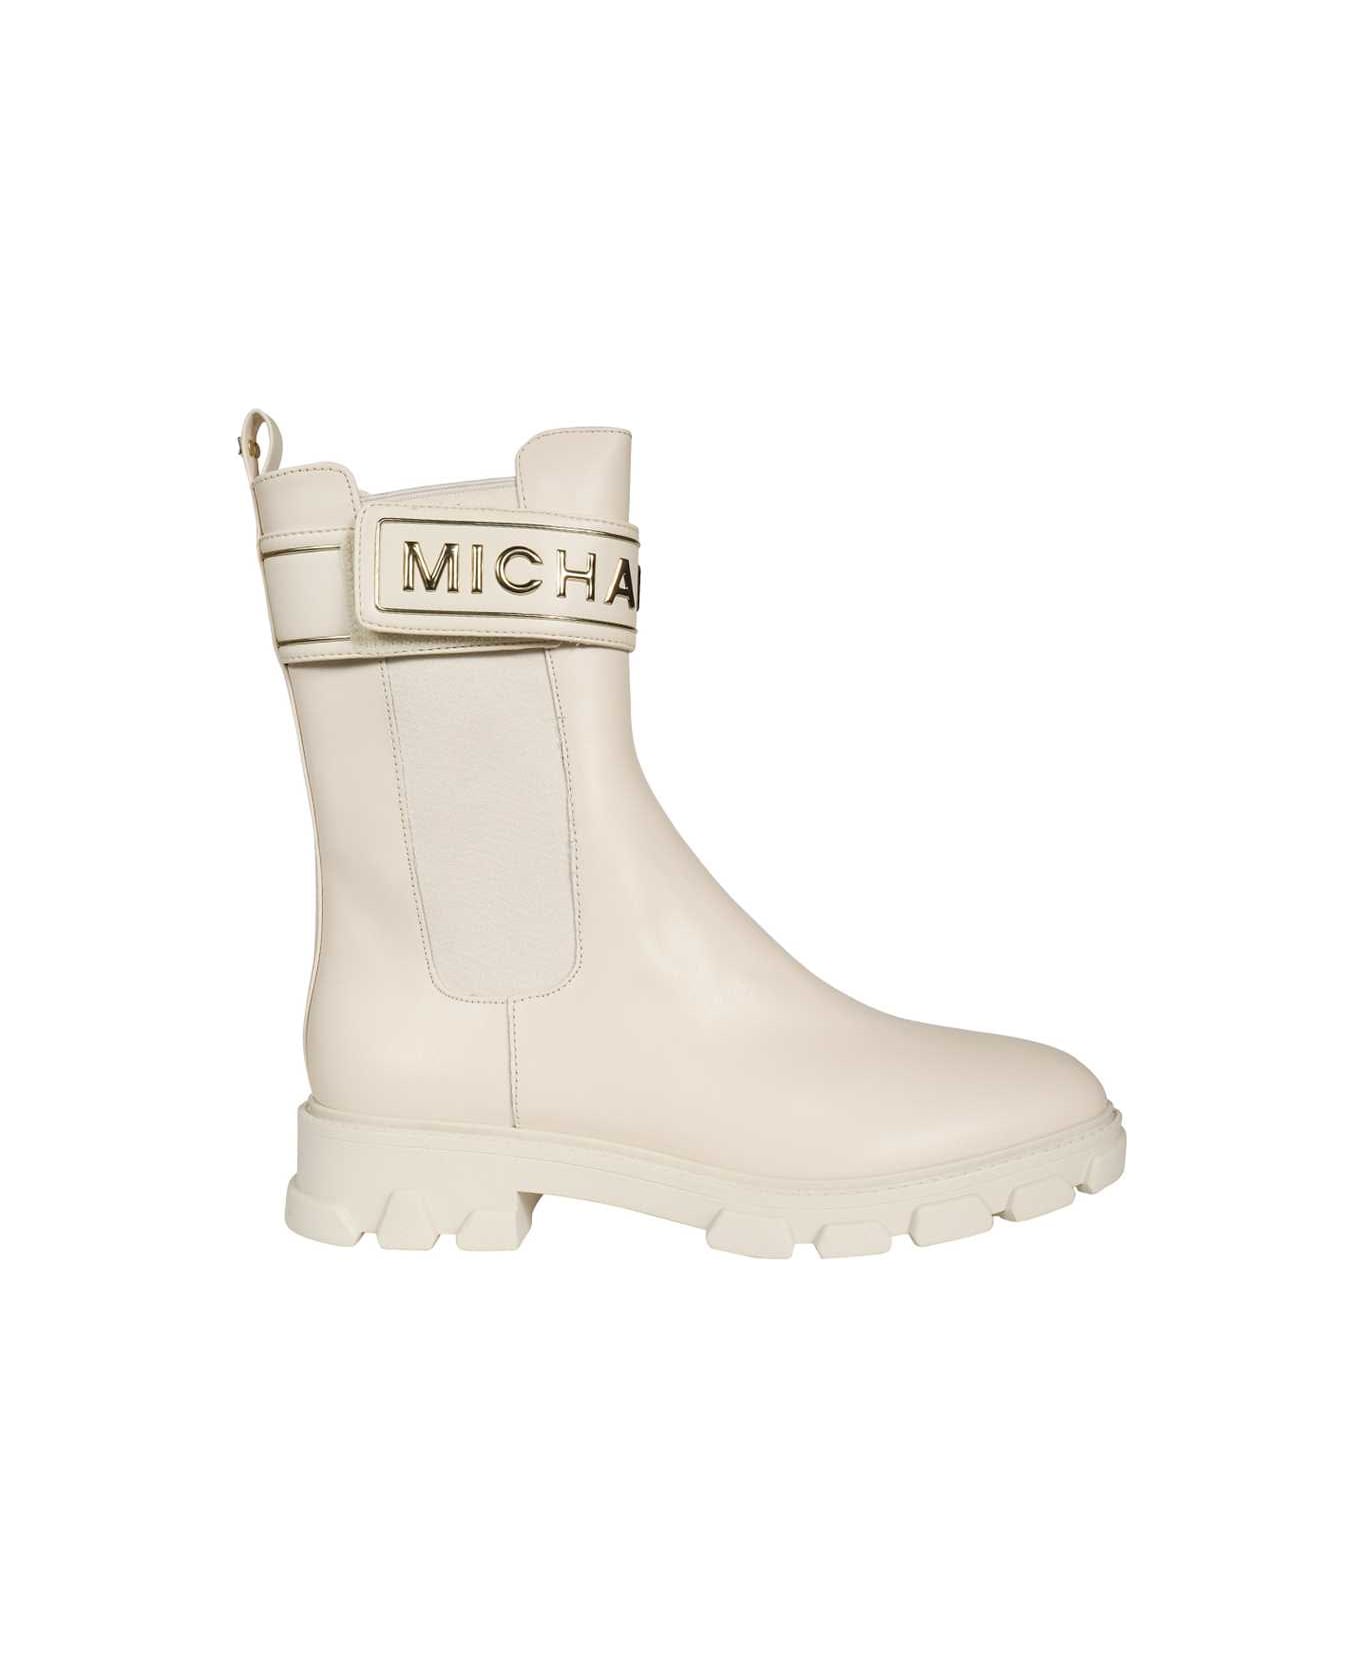 MICHAEL Michael Kors Leather Ankle Boots - White ブーツ